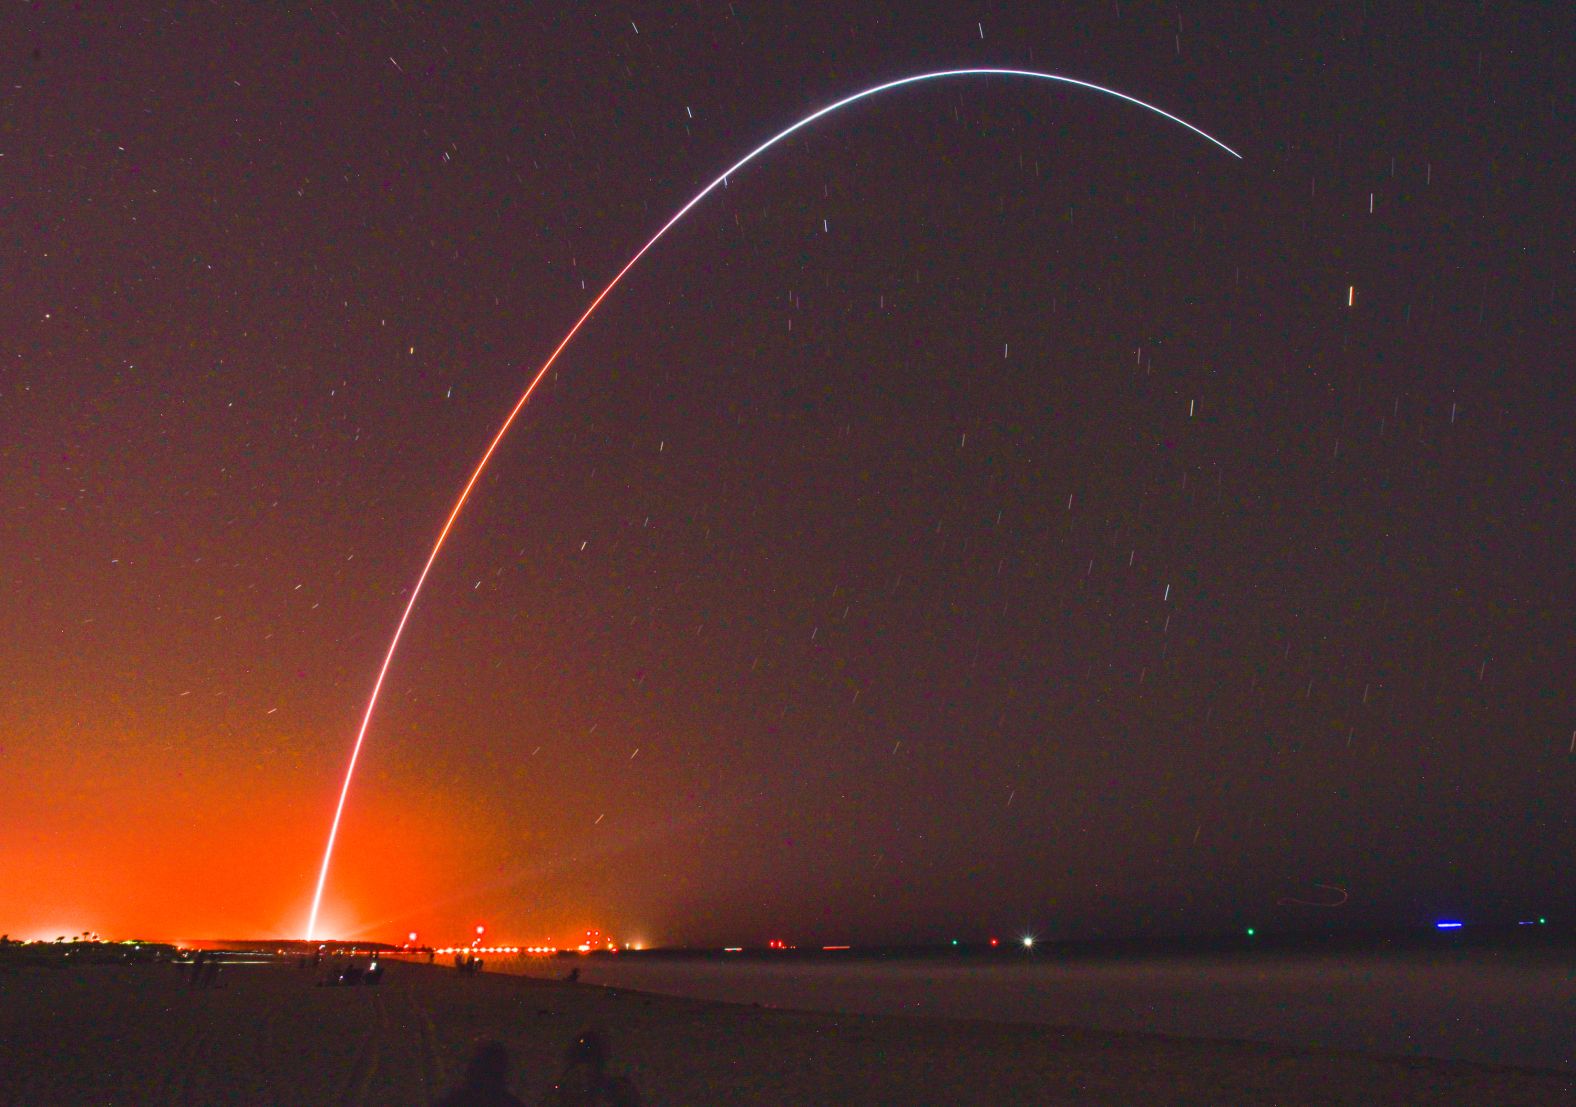 This long-exposure photo shows the Terran 1 rocket being launched from Cape Canaveral, Florida, on Wednesday, March 22. Terran 1, which startup Relativity Space called the "world's first 3D-printed rocket," <a href="index.php?page=&url=https%3A%2F%2Fwww.cnn.com%2F2023%2F03%2F22%2Fbusiness%2Frelativity-rocket-launch-florida-scn%2Findex.html" target="_blank">suffered an engine issue after launch</a> and failed to reach orbit.